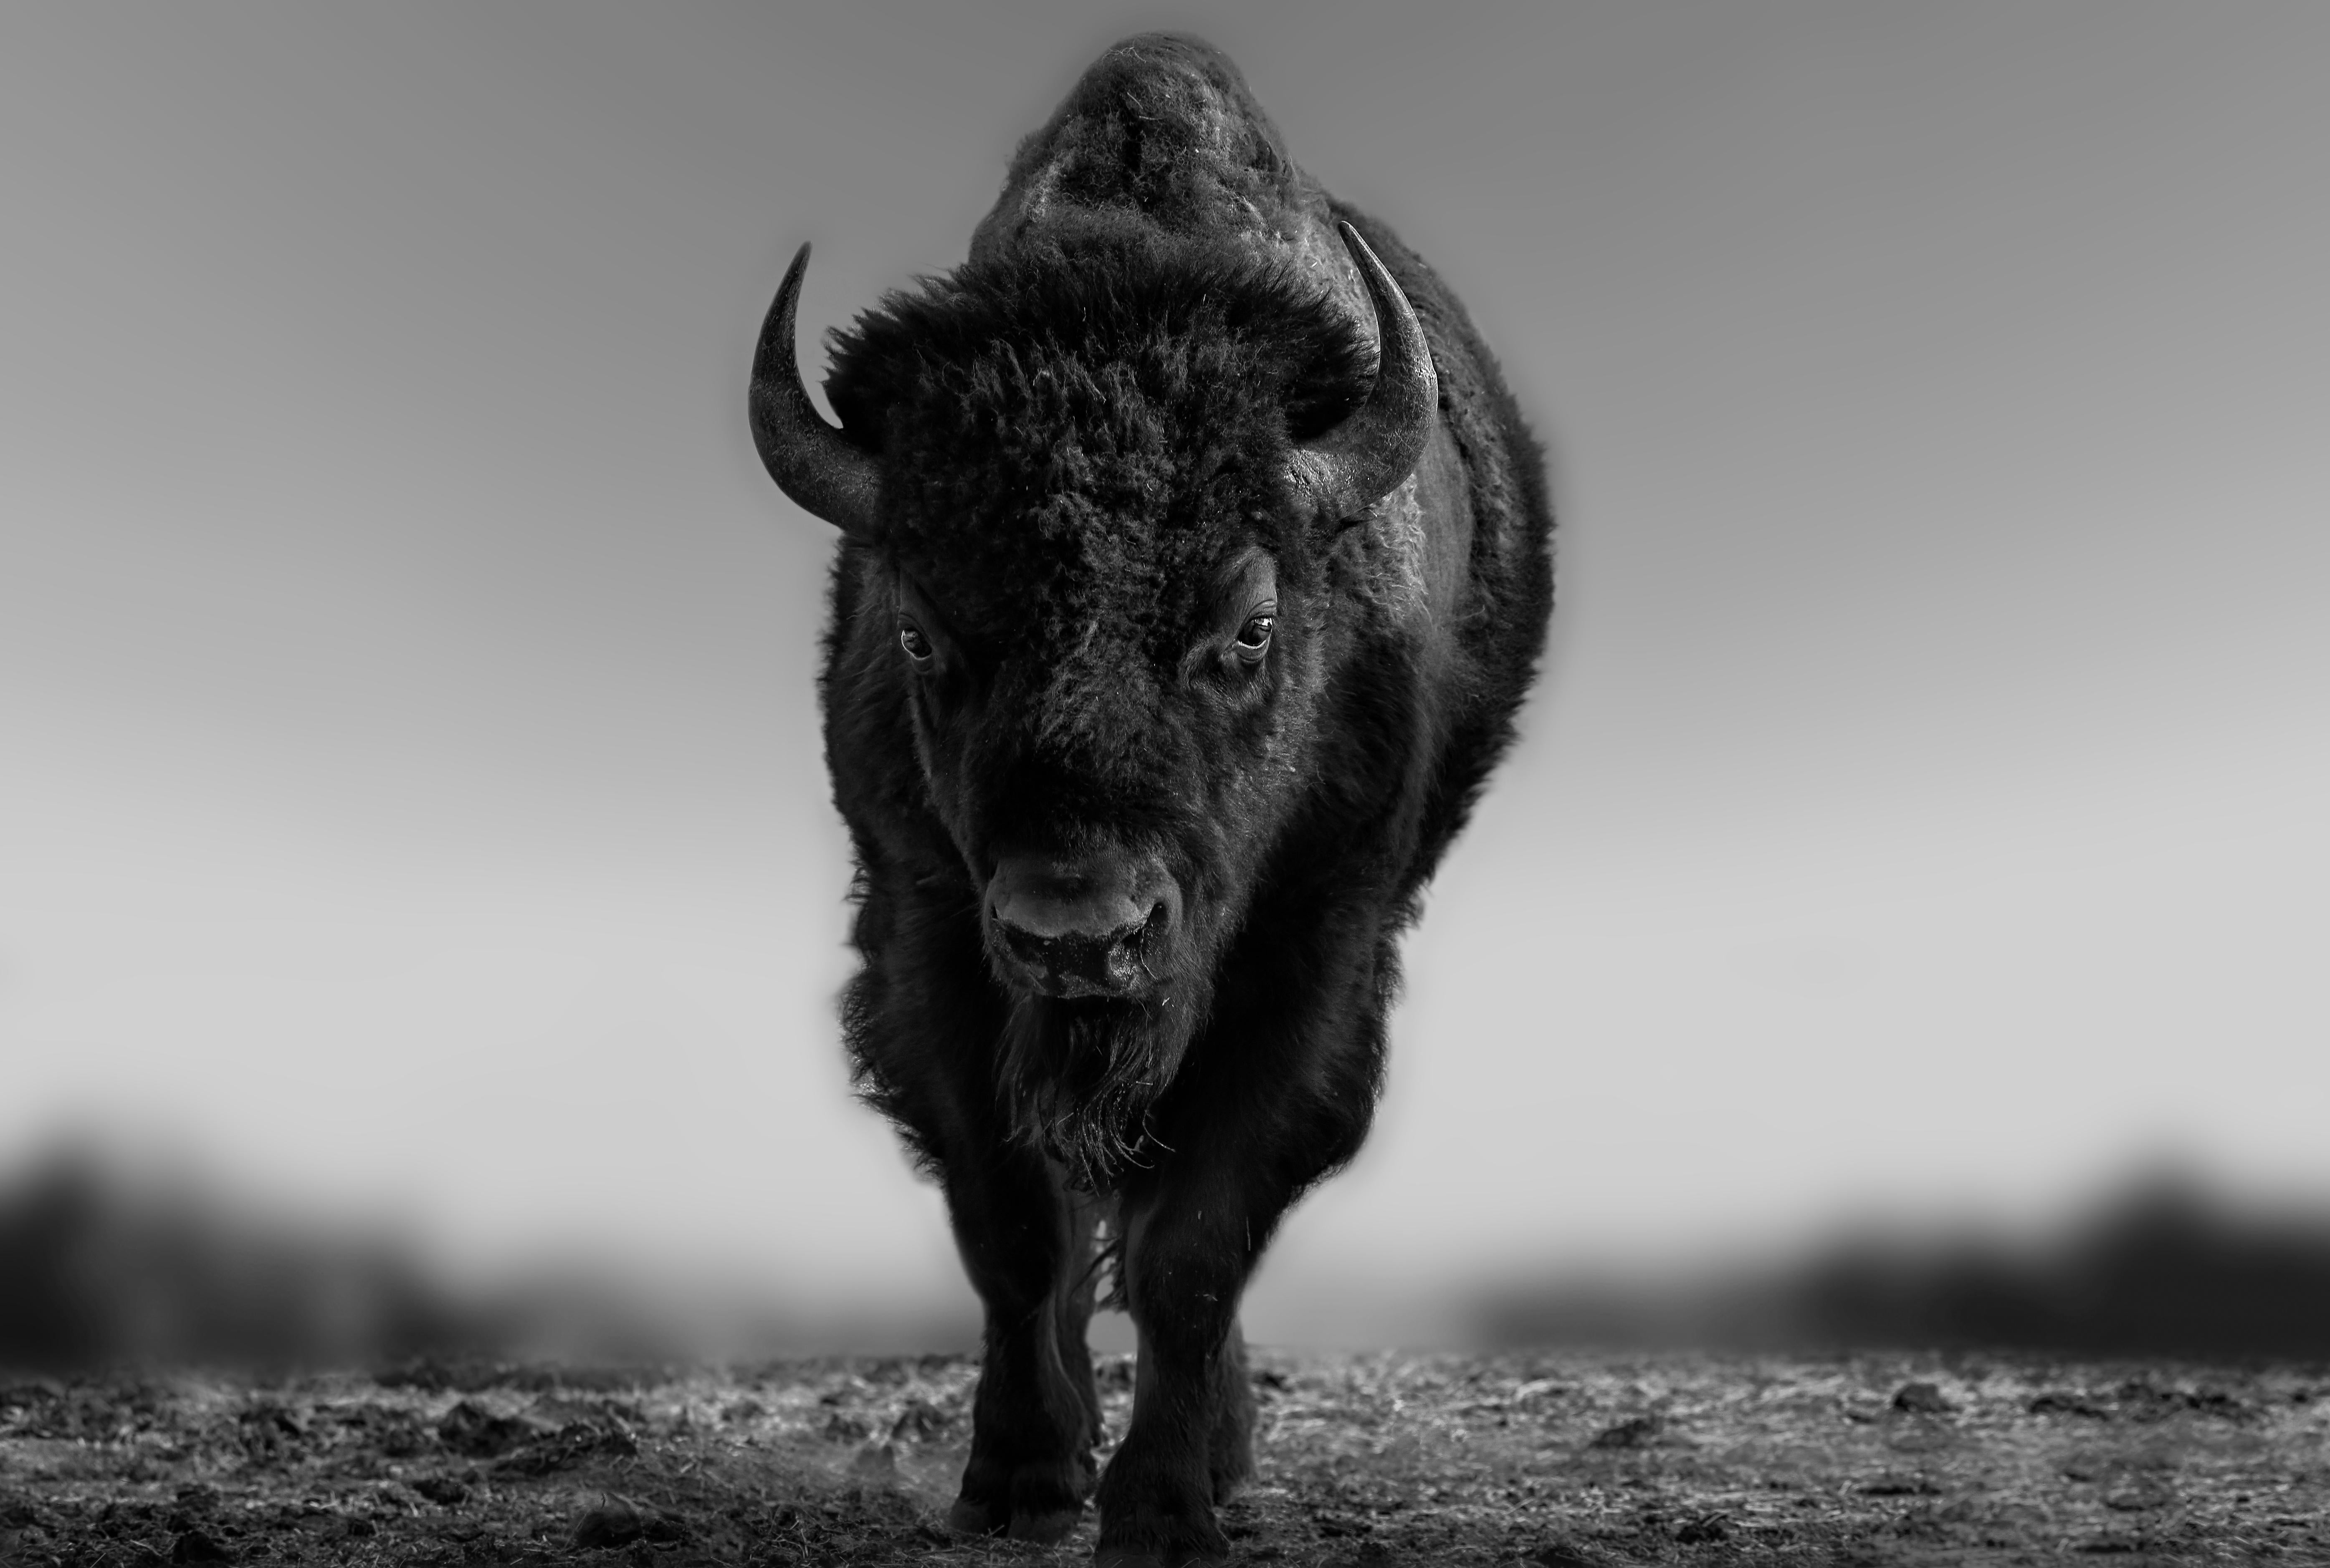 Black and White Photography of Bison, Buffalo "The Beast" 45x60 Photograph